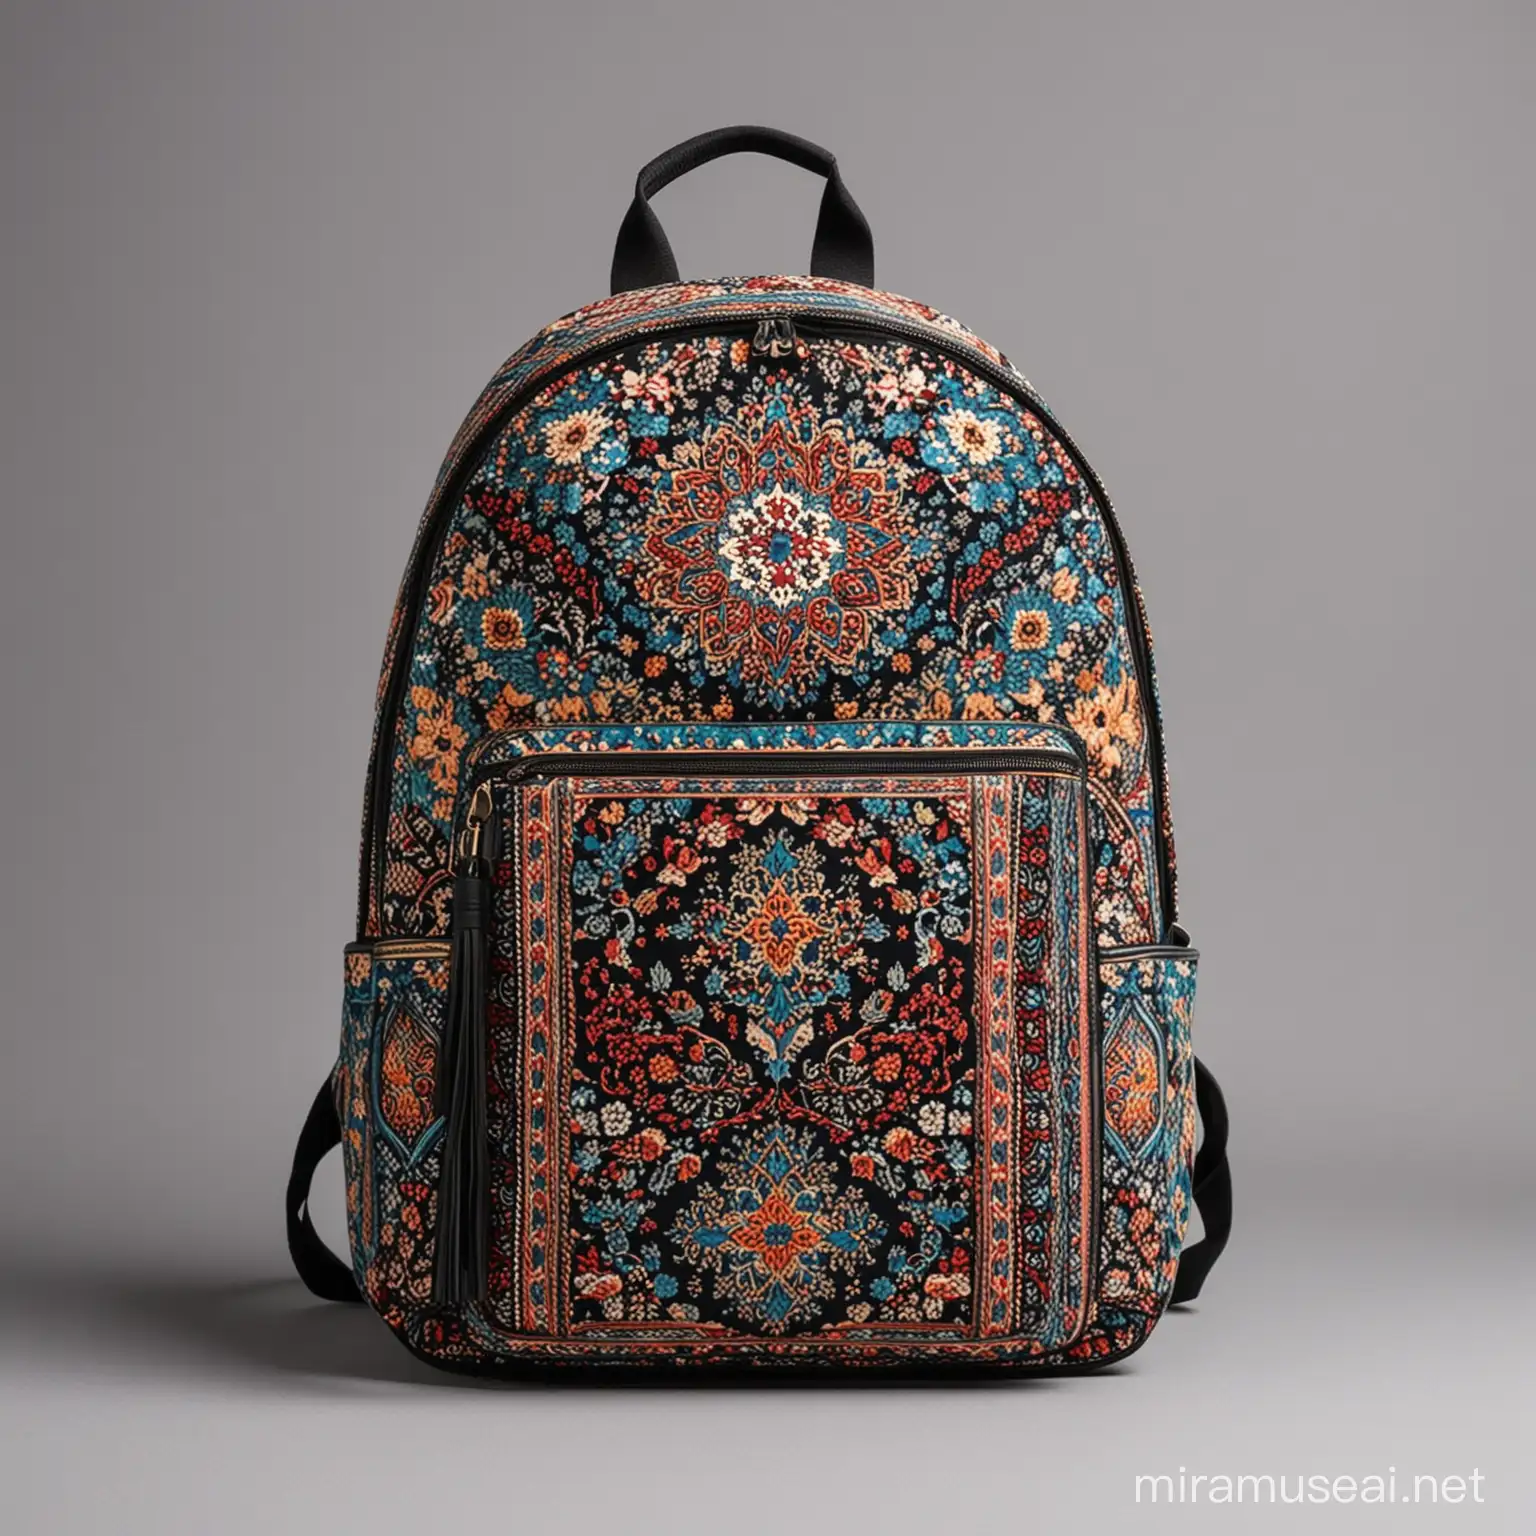 Persian Patterned Backpack Unique Creative Design for Travelers